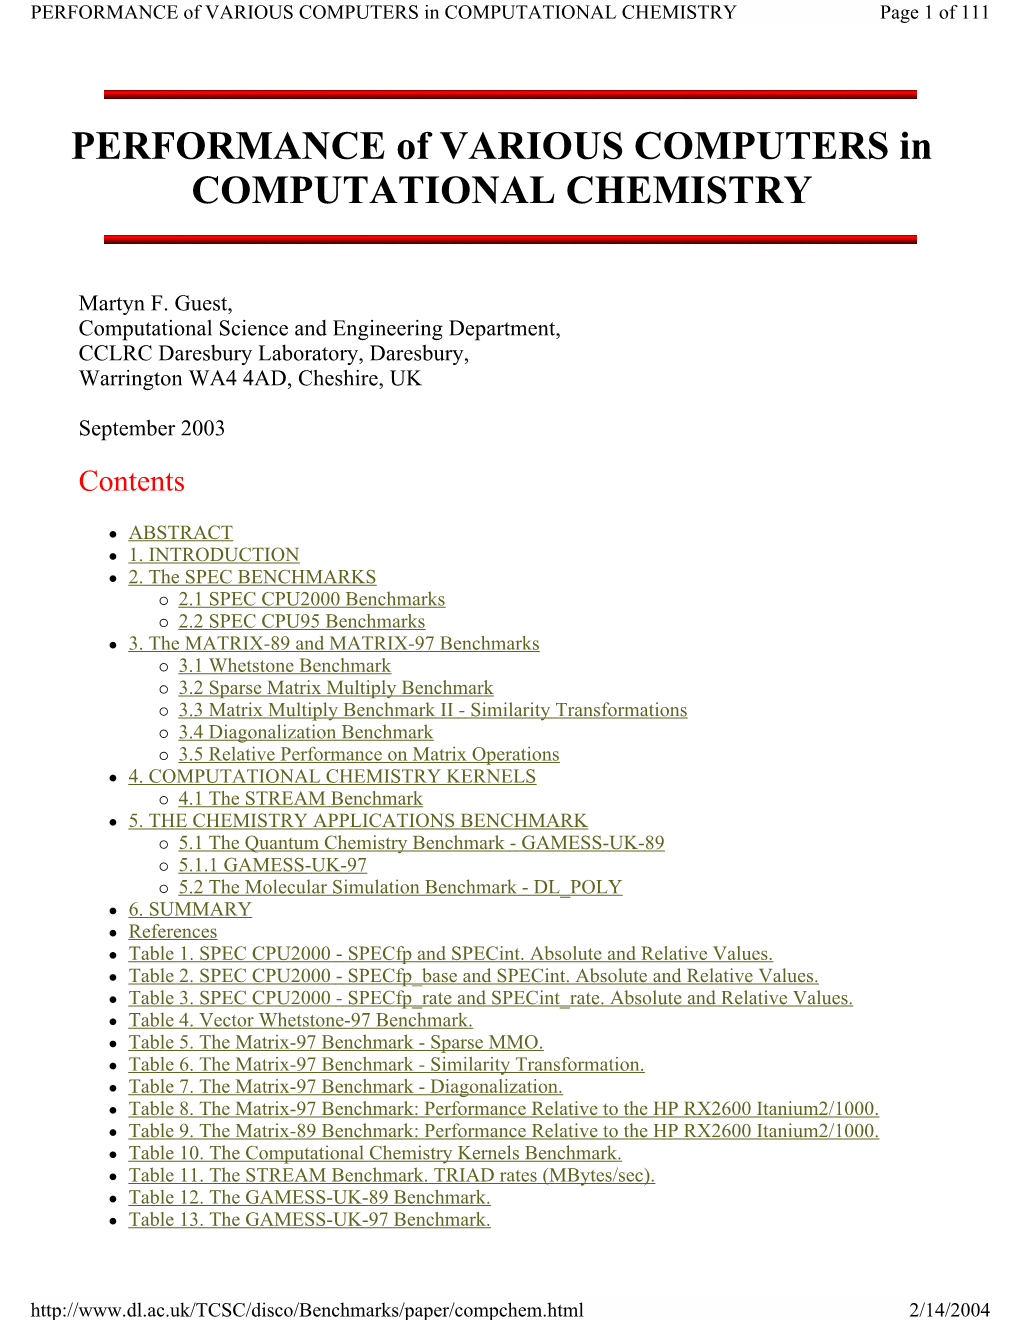 PERFORMANCE of VARIOUS COMPUTERS in COMPUTATIONAL CHEMISTRY Page 1 of 111